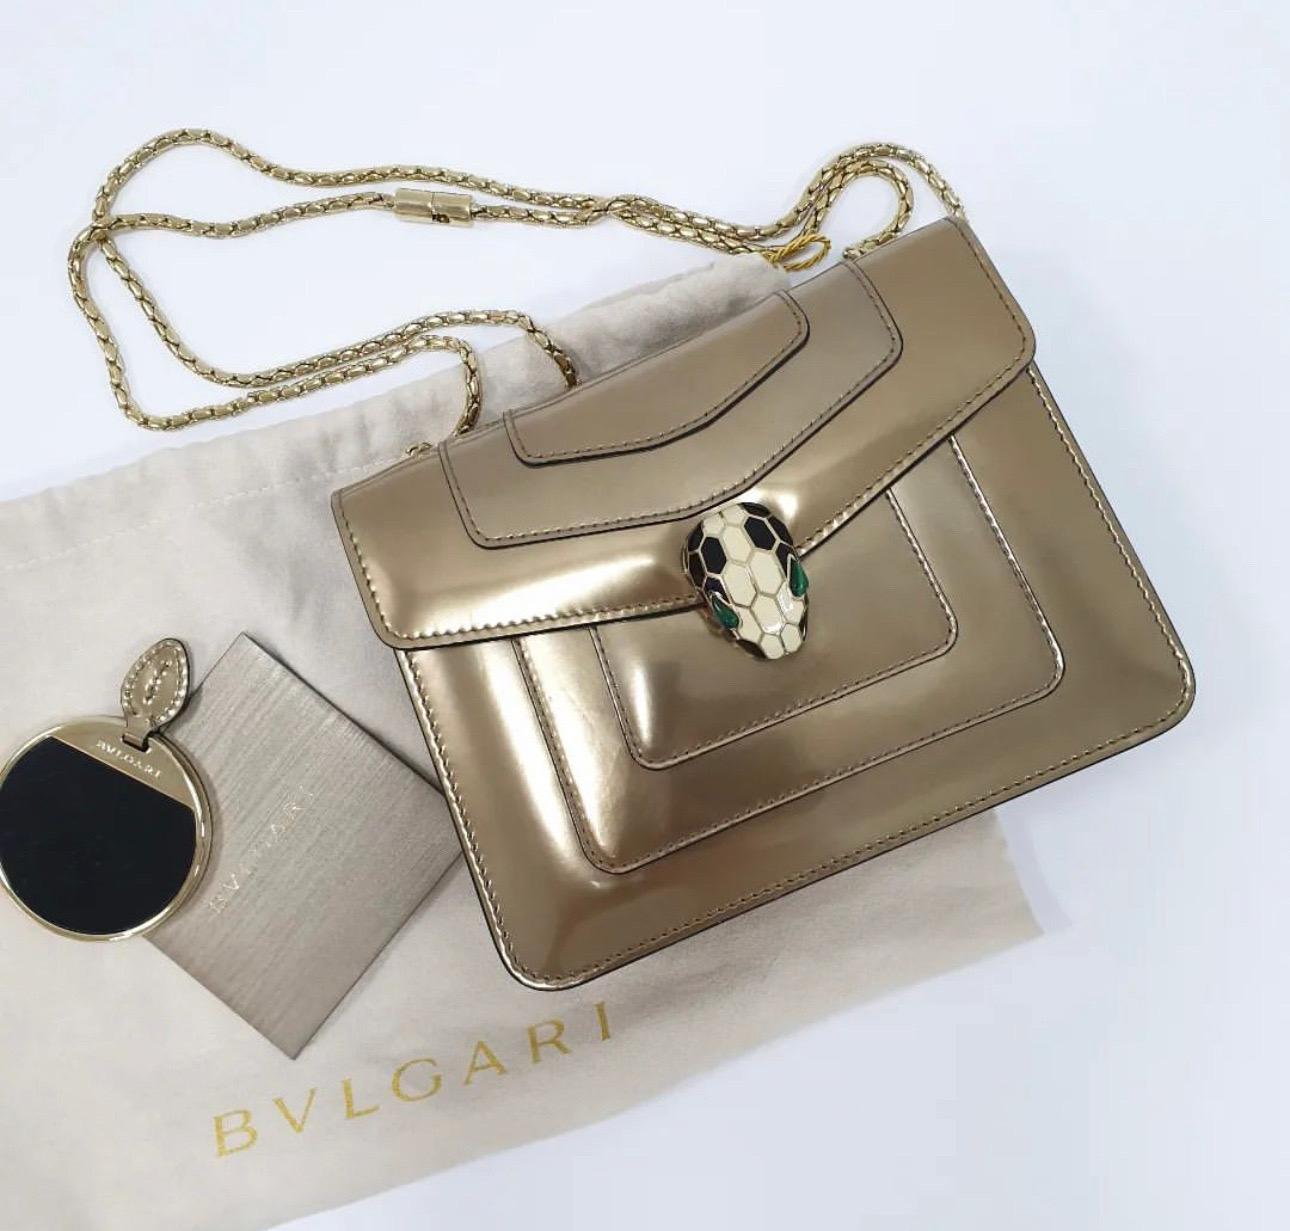 Defined by its snakehead lock hardware - the hallmark of Bvlgari's Serpenti collection - this luxurious Forever cross body bag is an heirloom in the making.
Crafted with distinction from smooth metallicleather, the panelled design boasts a flap